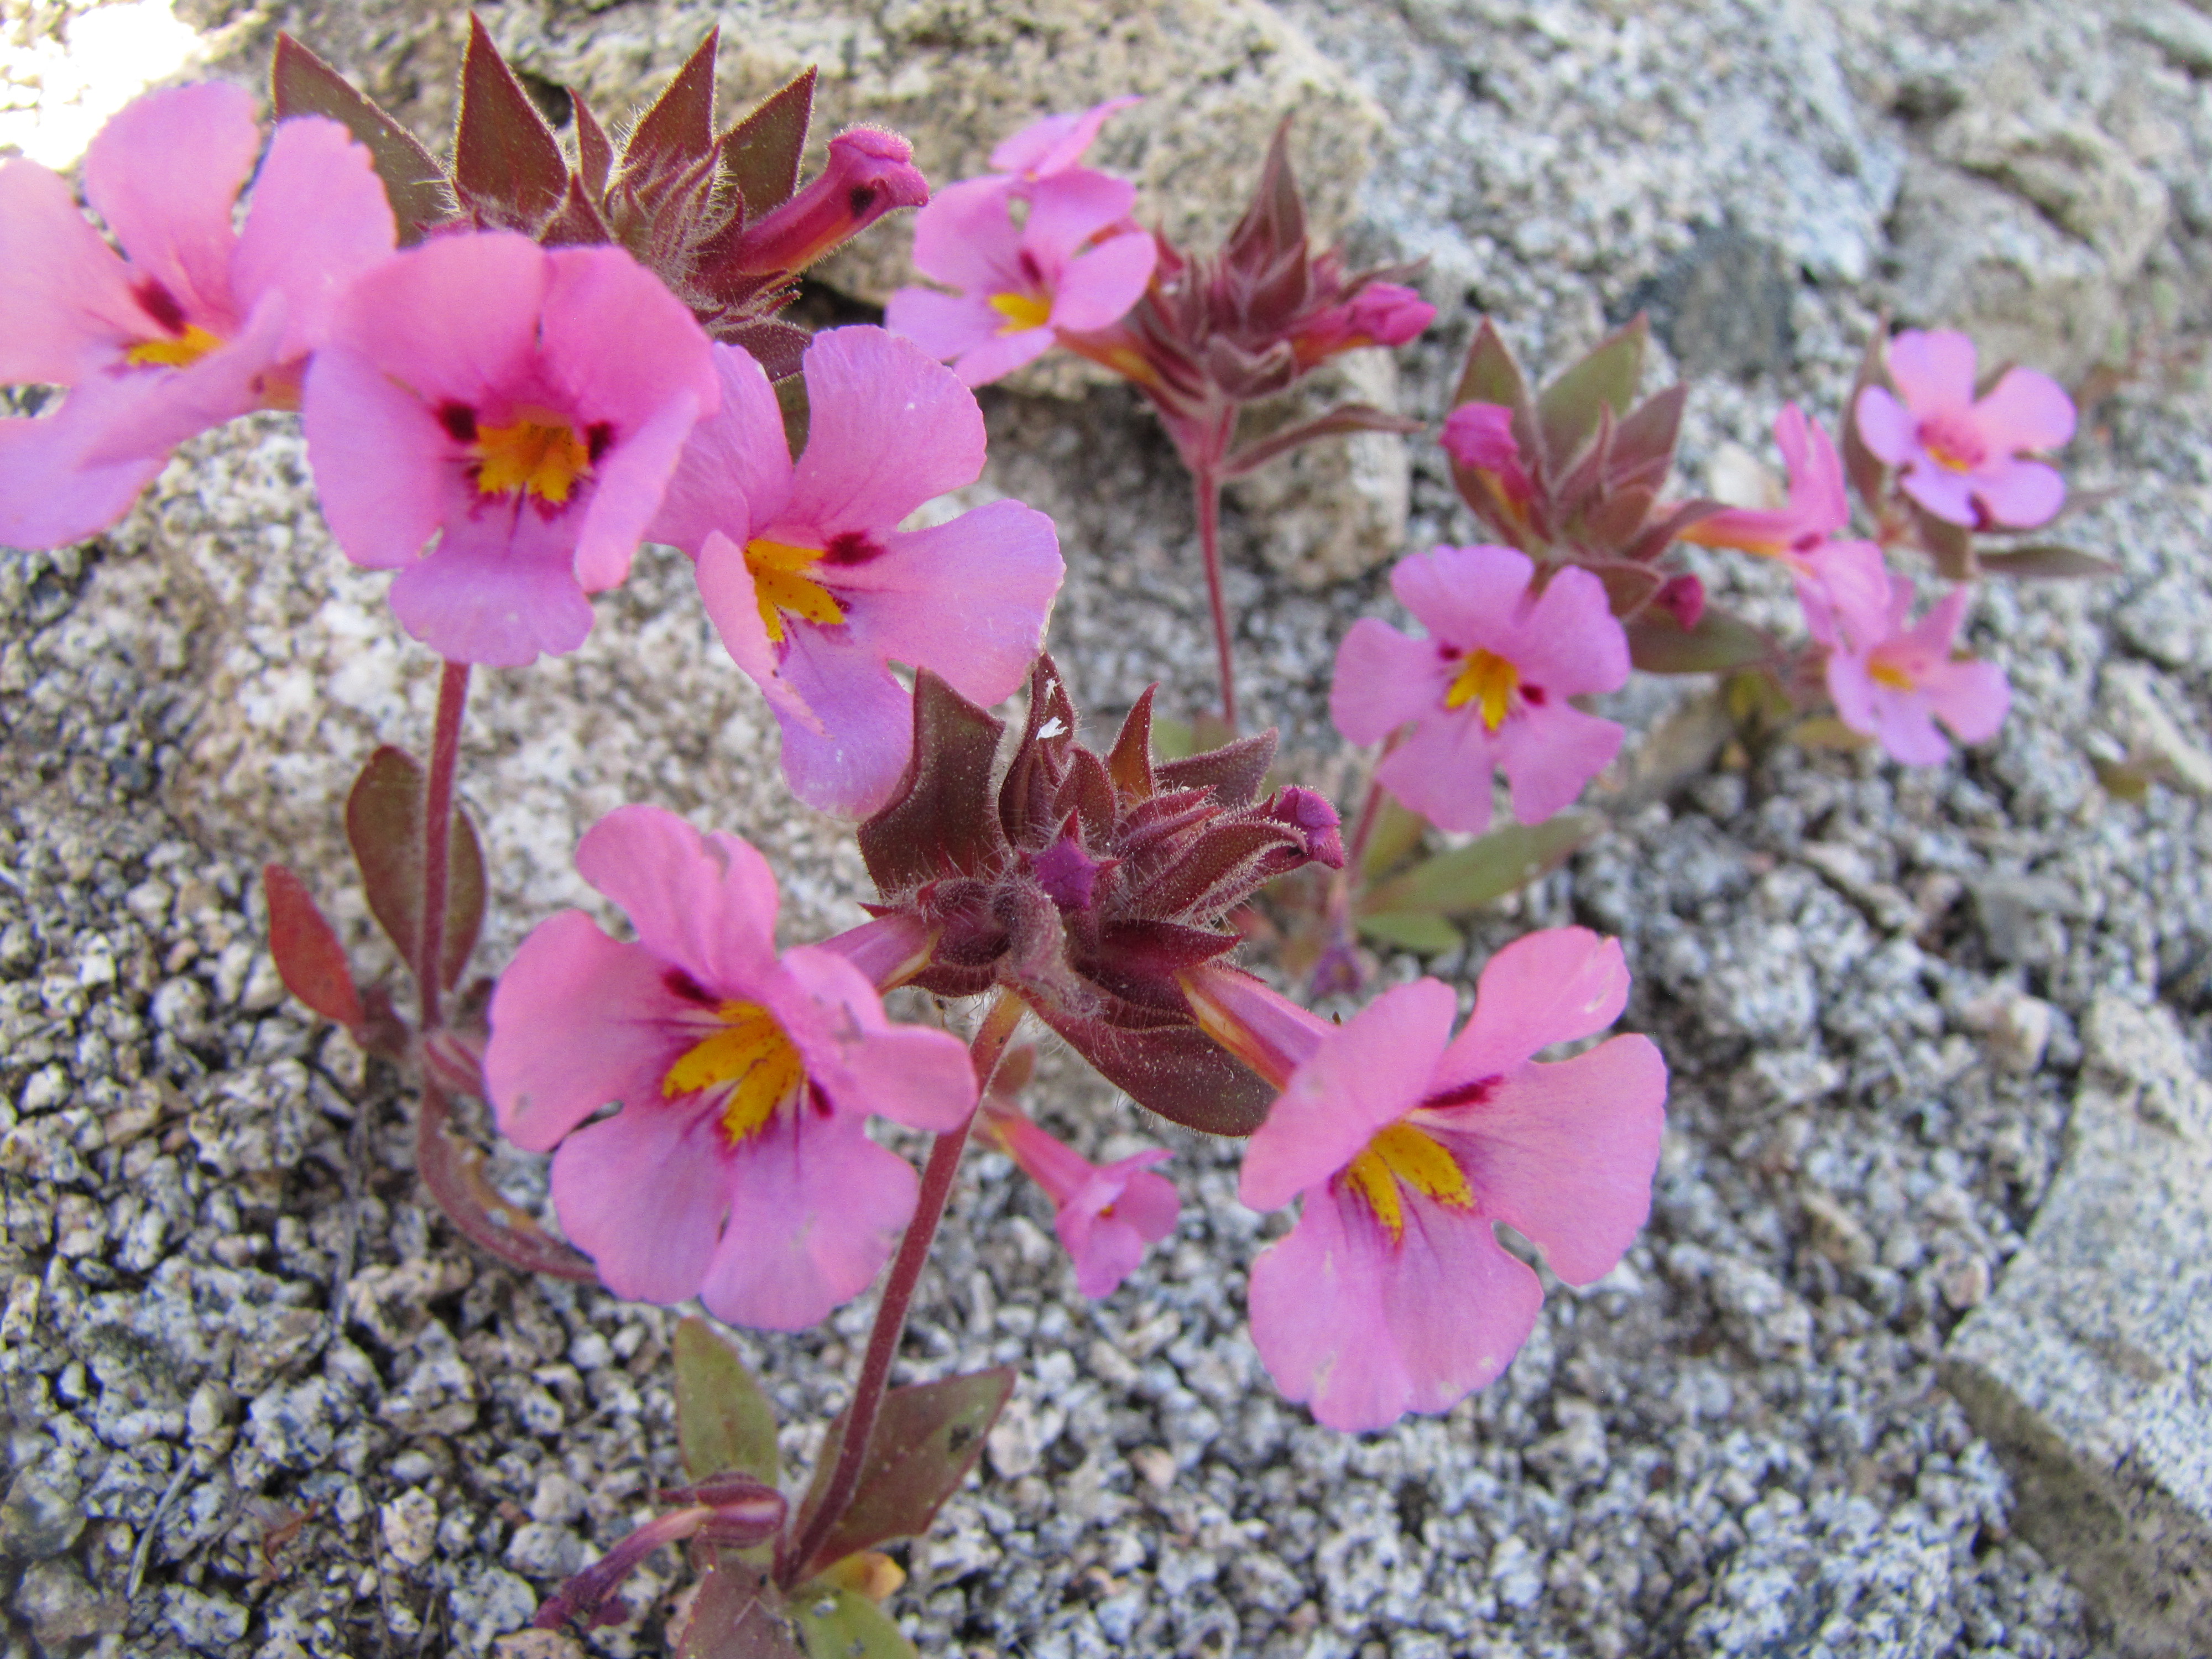 Pink flowers with yellow-orange centers. Photo: NPS / Neil Frakes